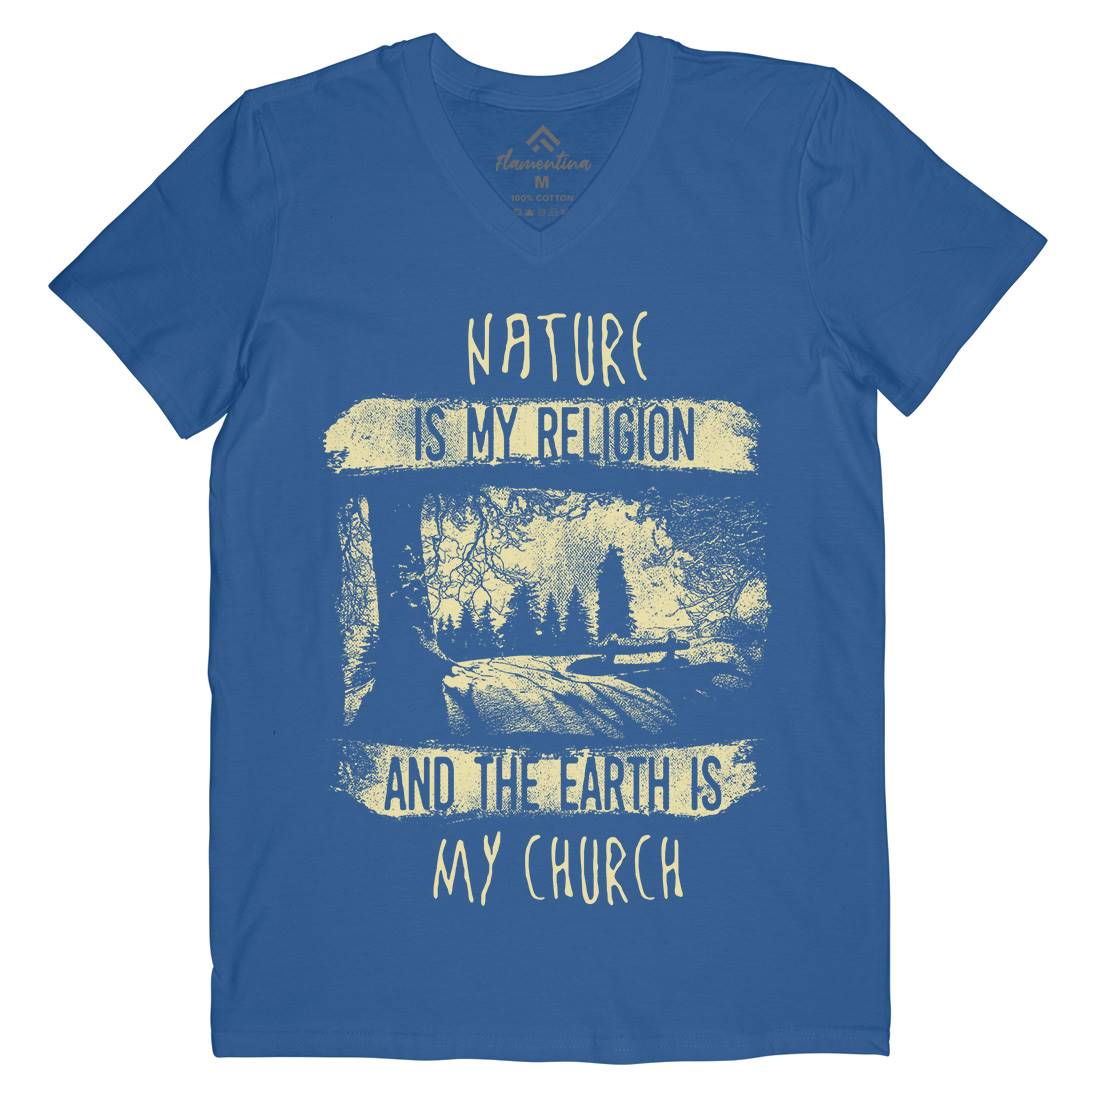 Is My Religion Mens V-Neck T-Shirt Nature C967